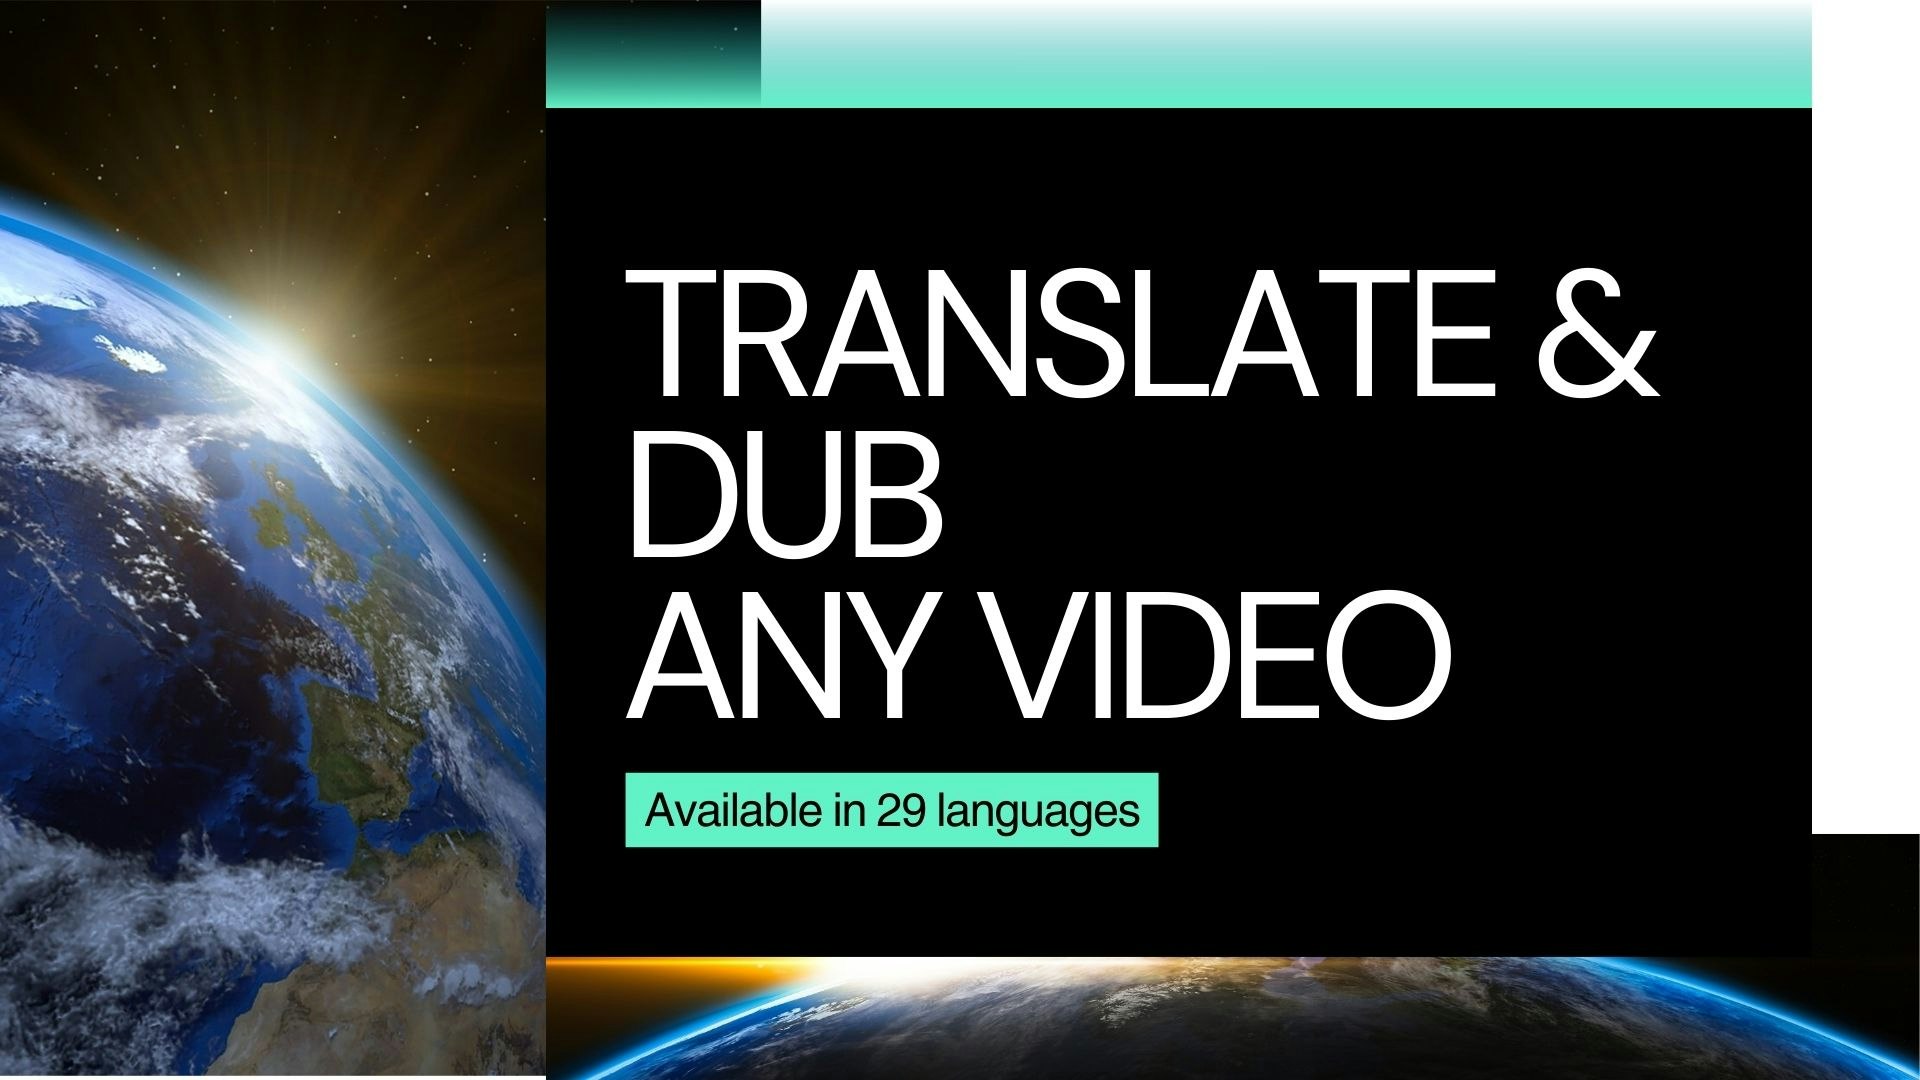 voicecheap - Dub & translate any video in any language